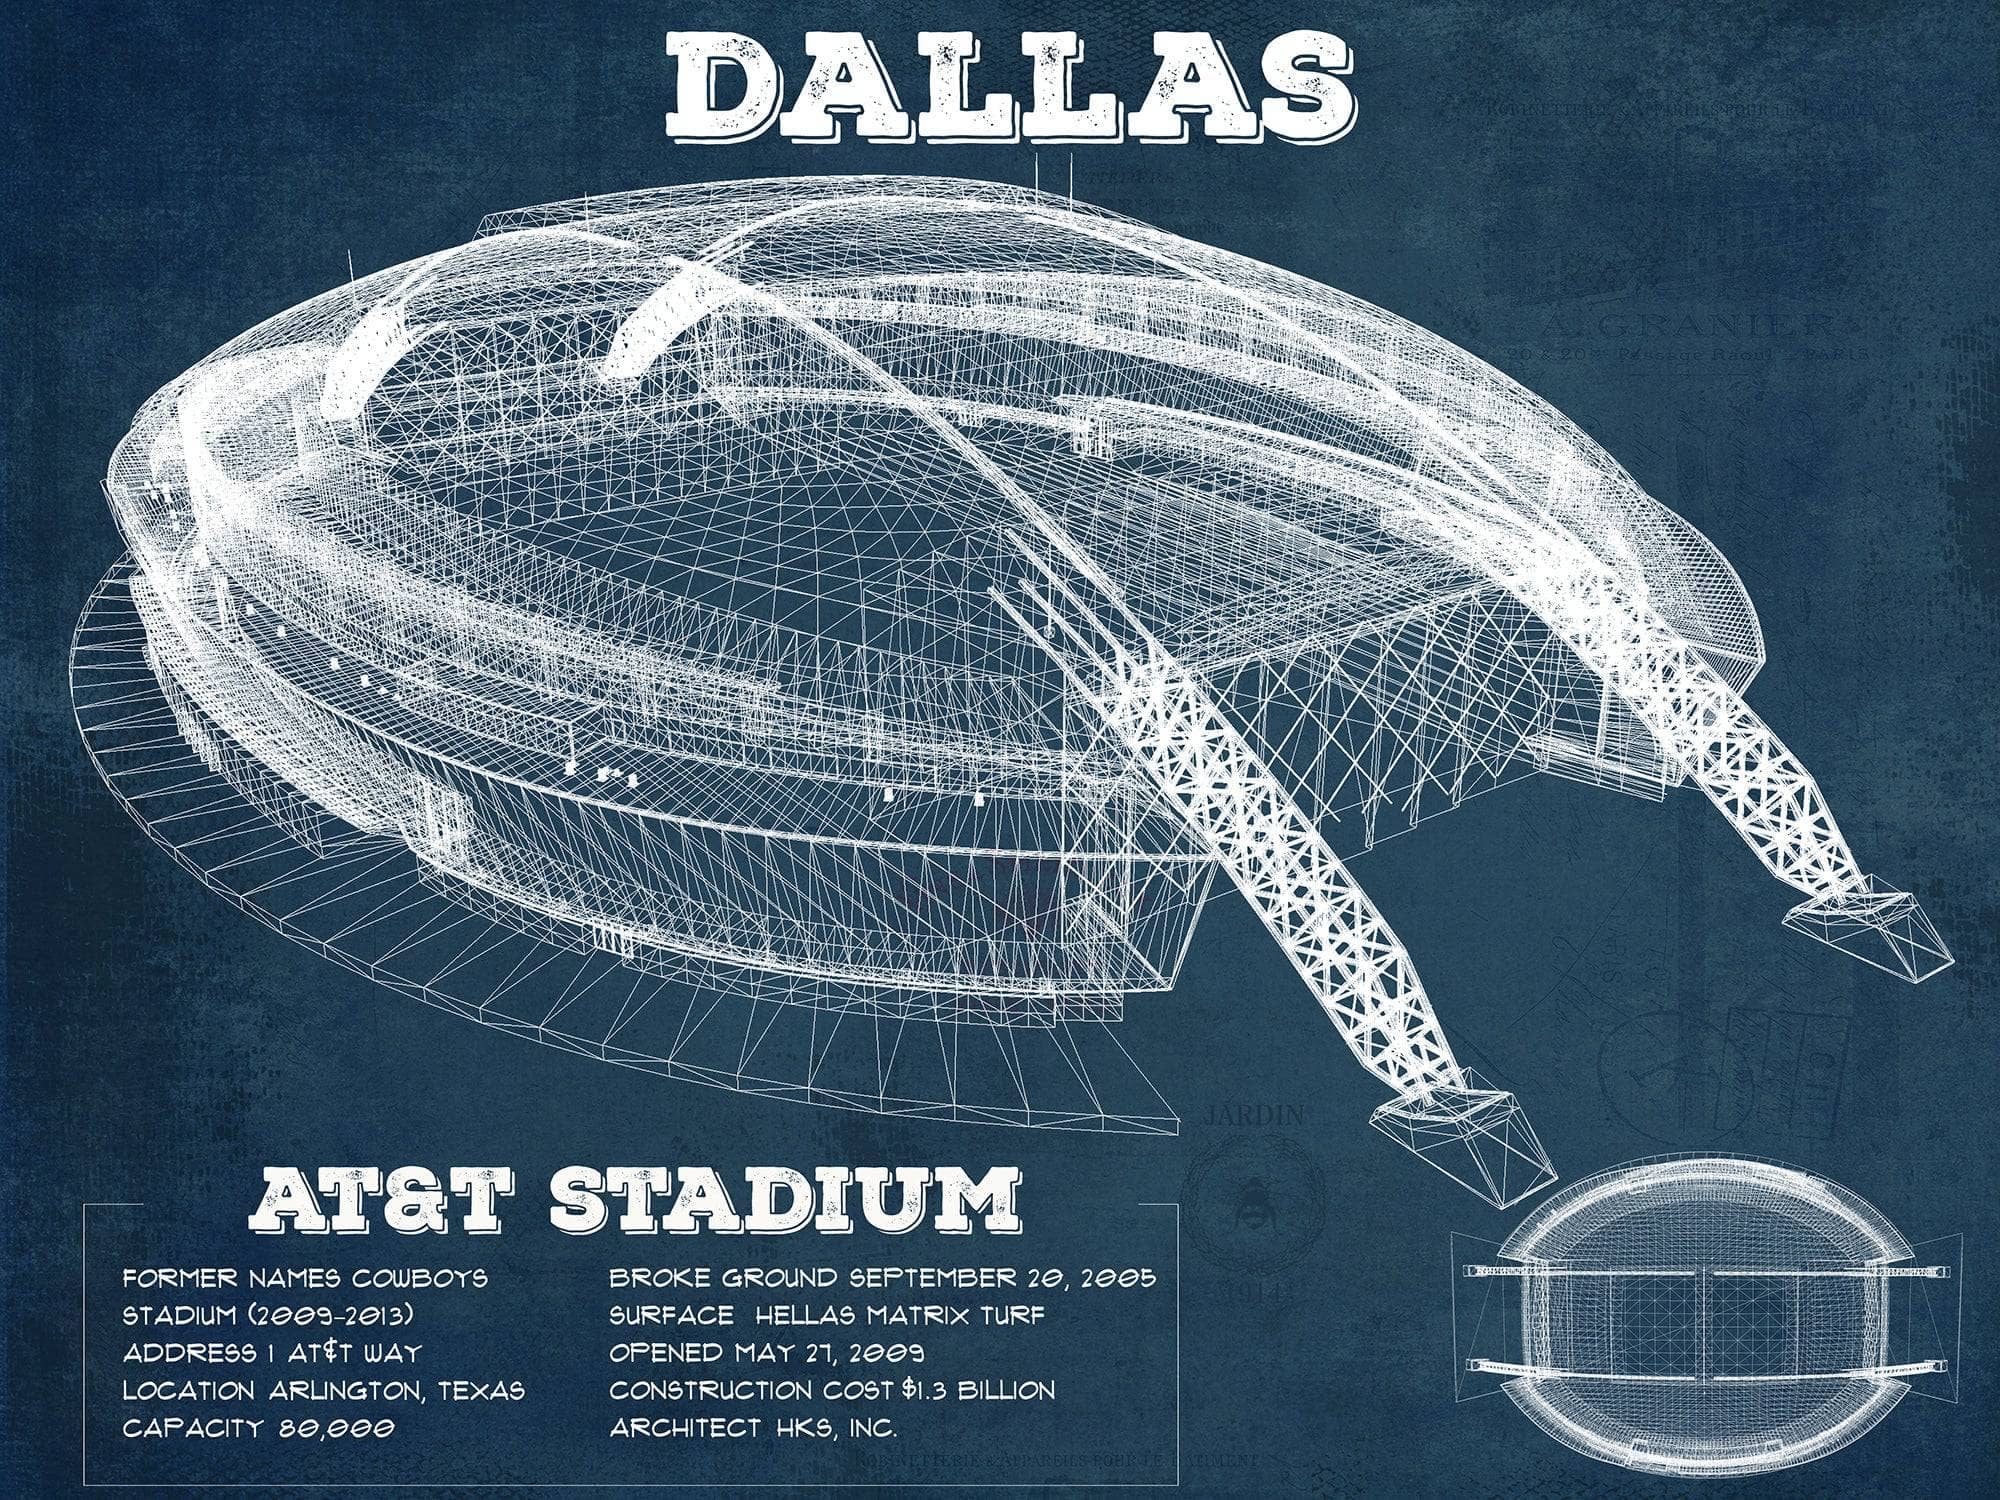 Cutler West Pro Football Collection 14" x 11" / Unframed Dallas Cowboys - AT&T Stadium - Vintage Football Print 667011899-TOP